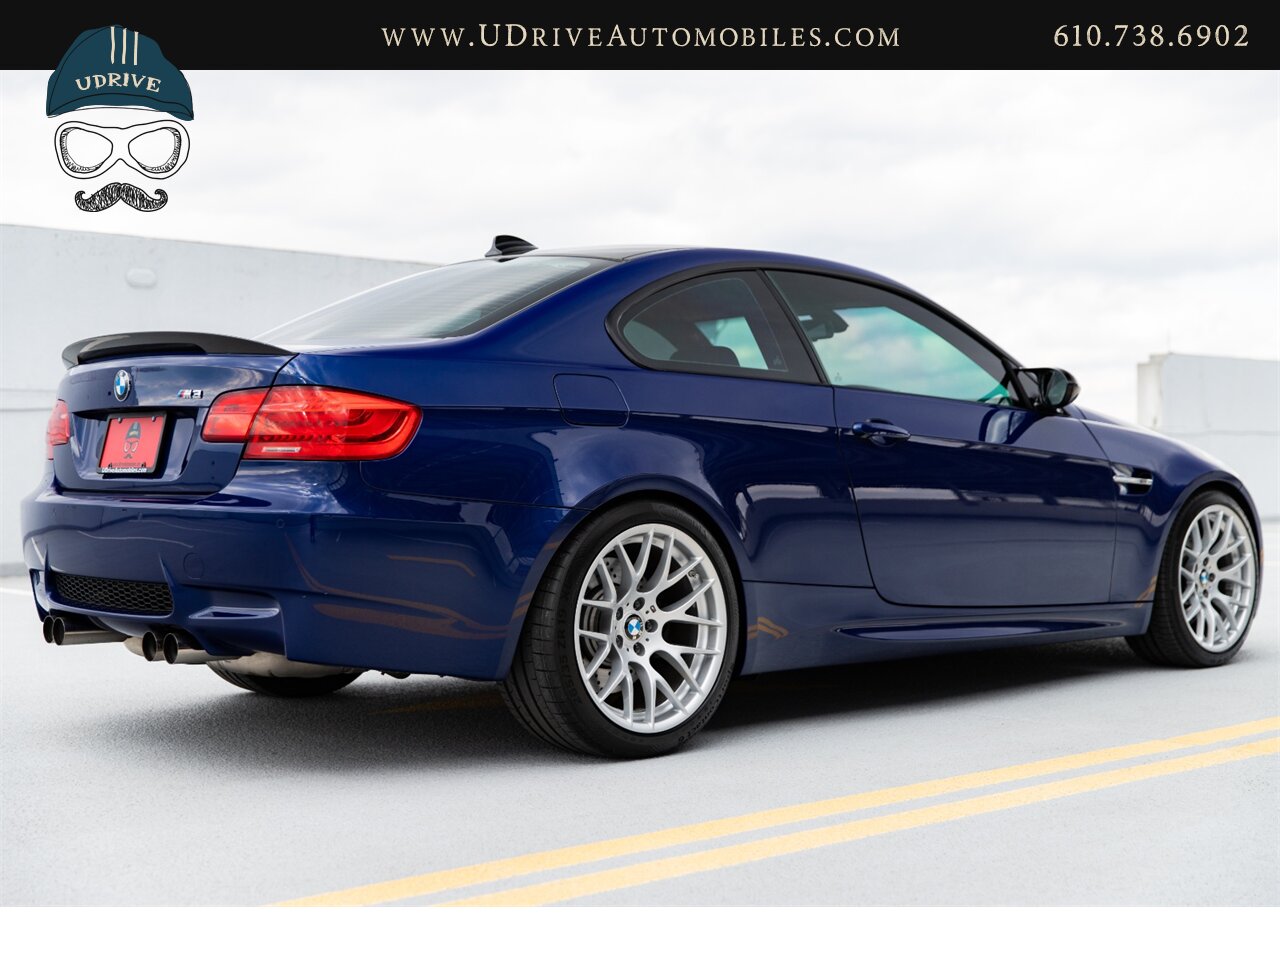 2011 BMW M3 E92 6 Speed Manual Competition Pkg Interlagos Blue  16k Miles Nav PDC EDC Comf Acc - Photo 19 - West Chester, PA 19382